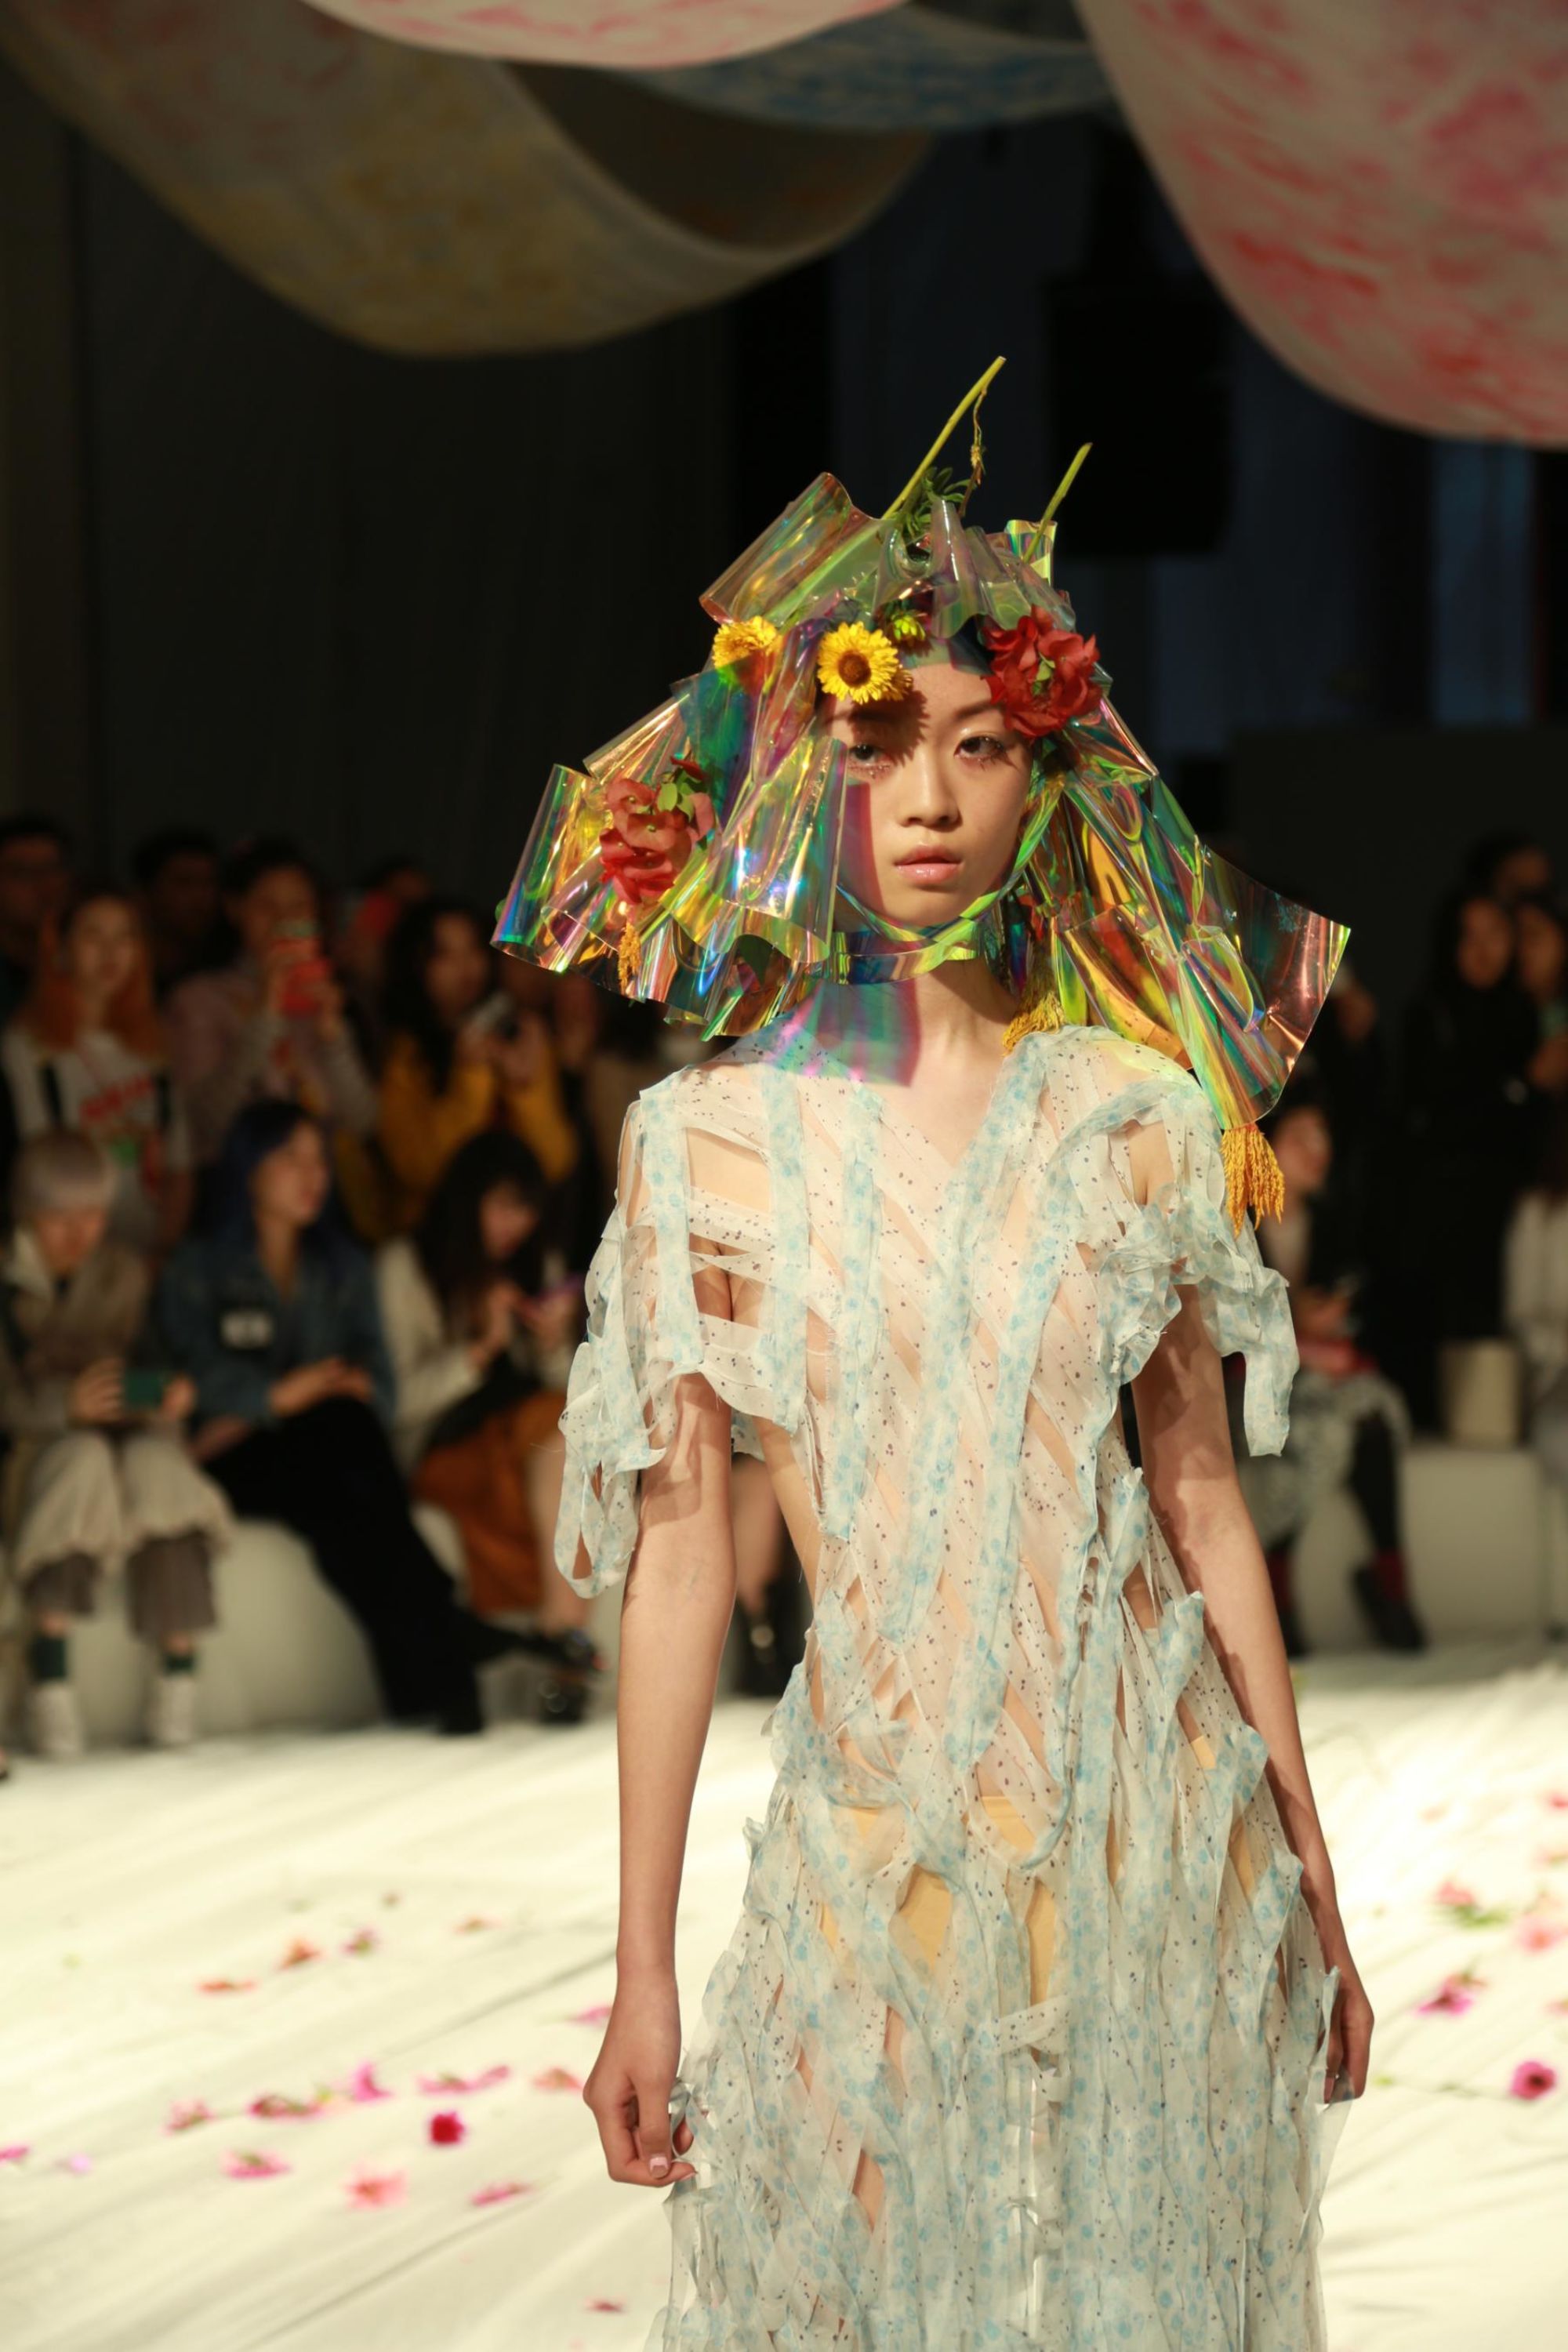 Shanghai Fashion Week: Gen Z consumers and the new ‘made in China’ | CNN